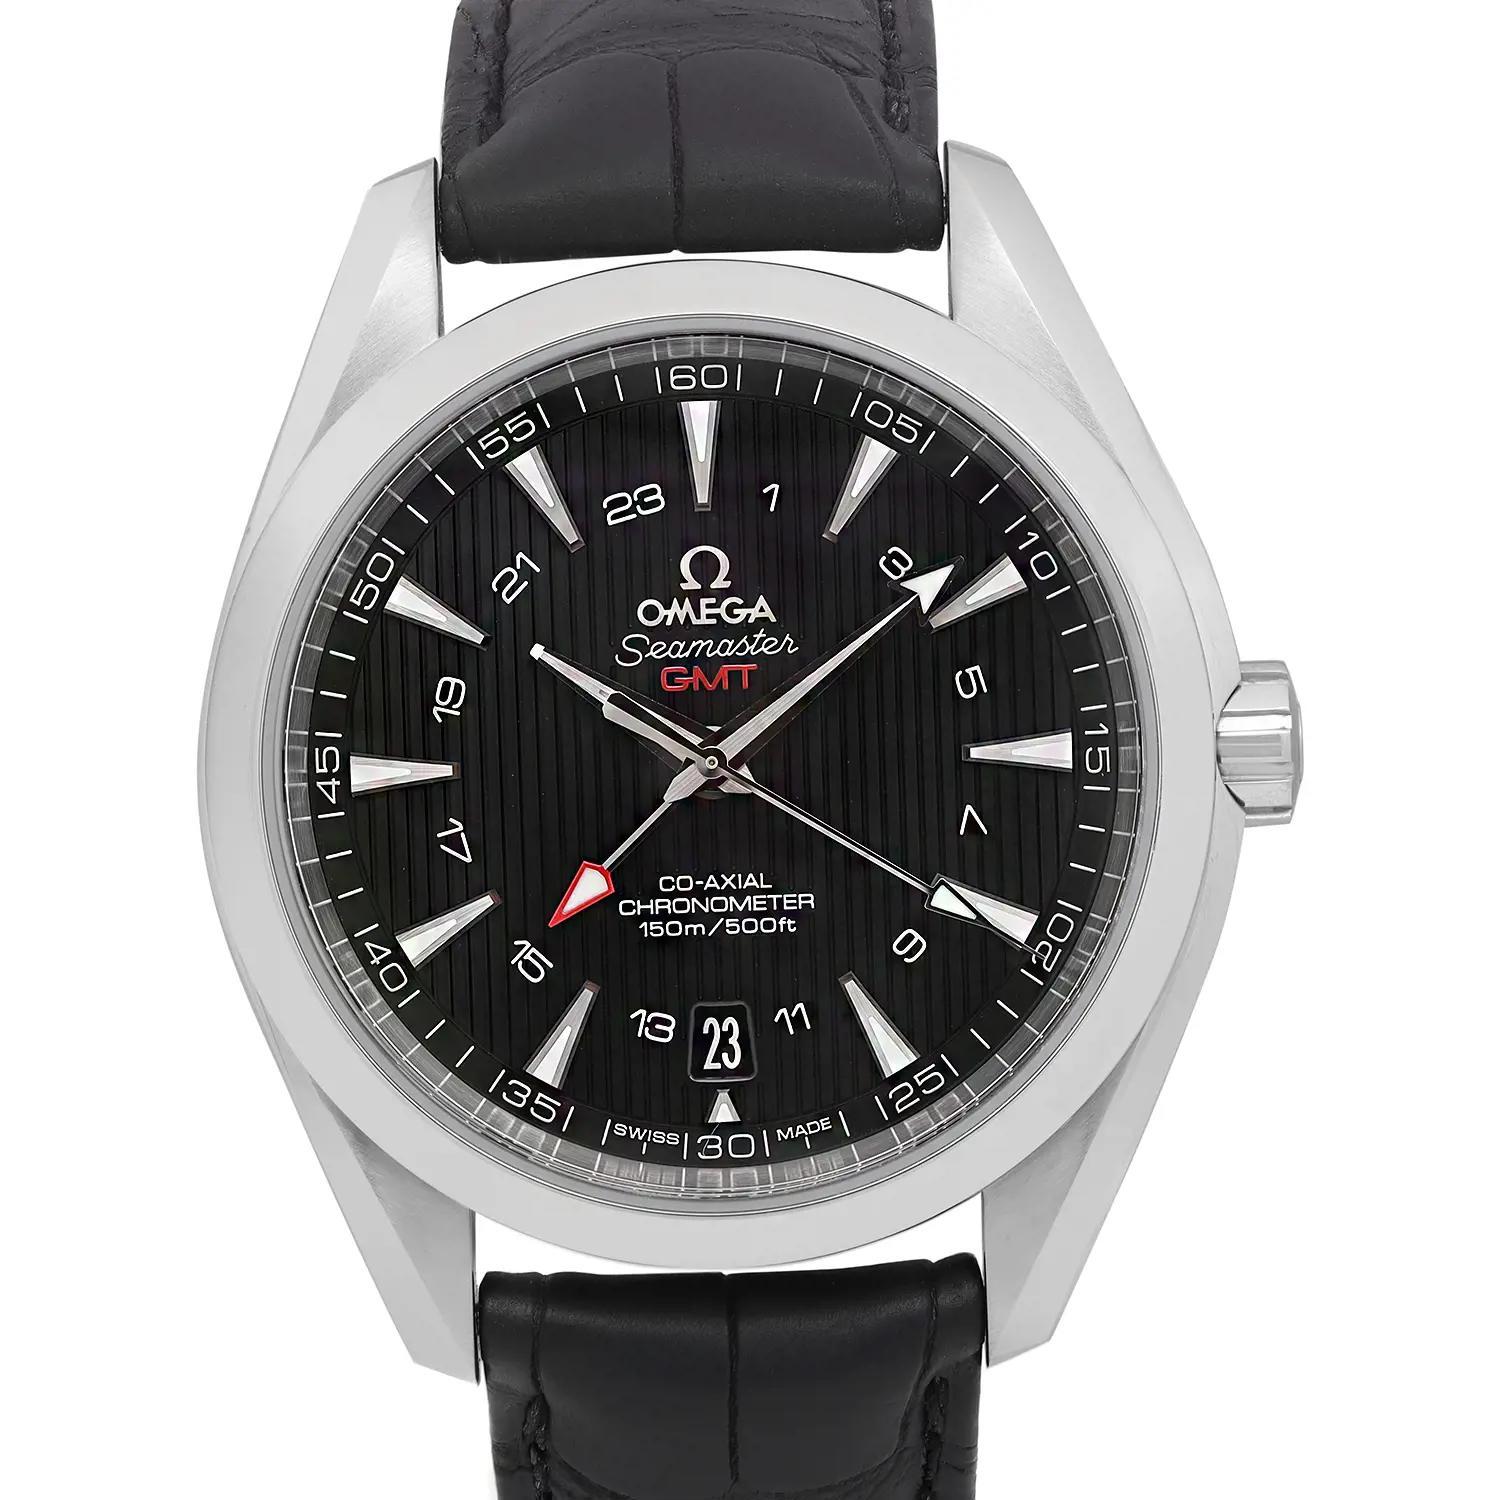 Display Model. The band is unworn and only has minor imperfections due to storing and handling. Comes with an original box. No papers are included. 

 Brand: OMEGA  Type: Wristwatch  Department: Men  Model Number: 231.13.43.22.01.001  Country/Region